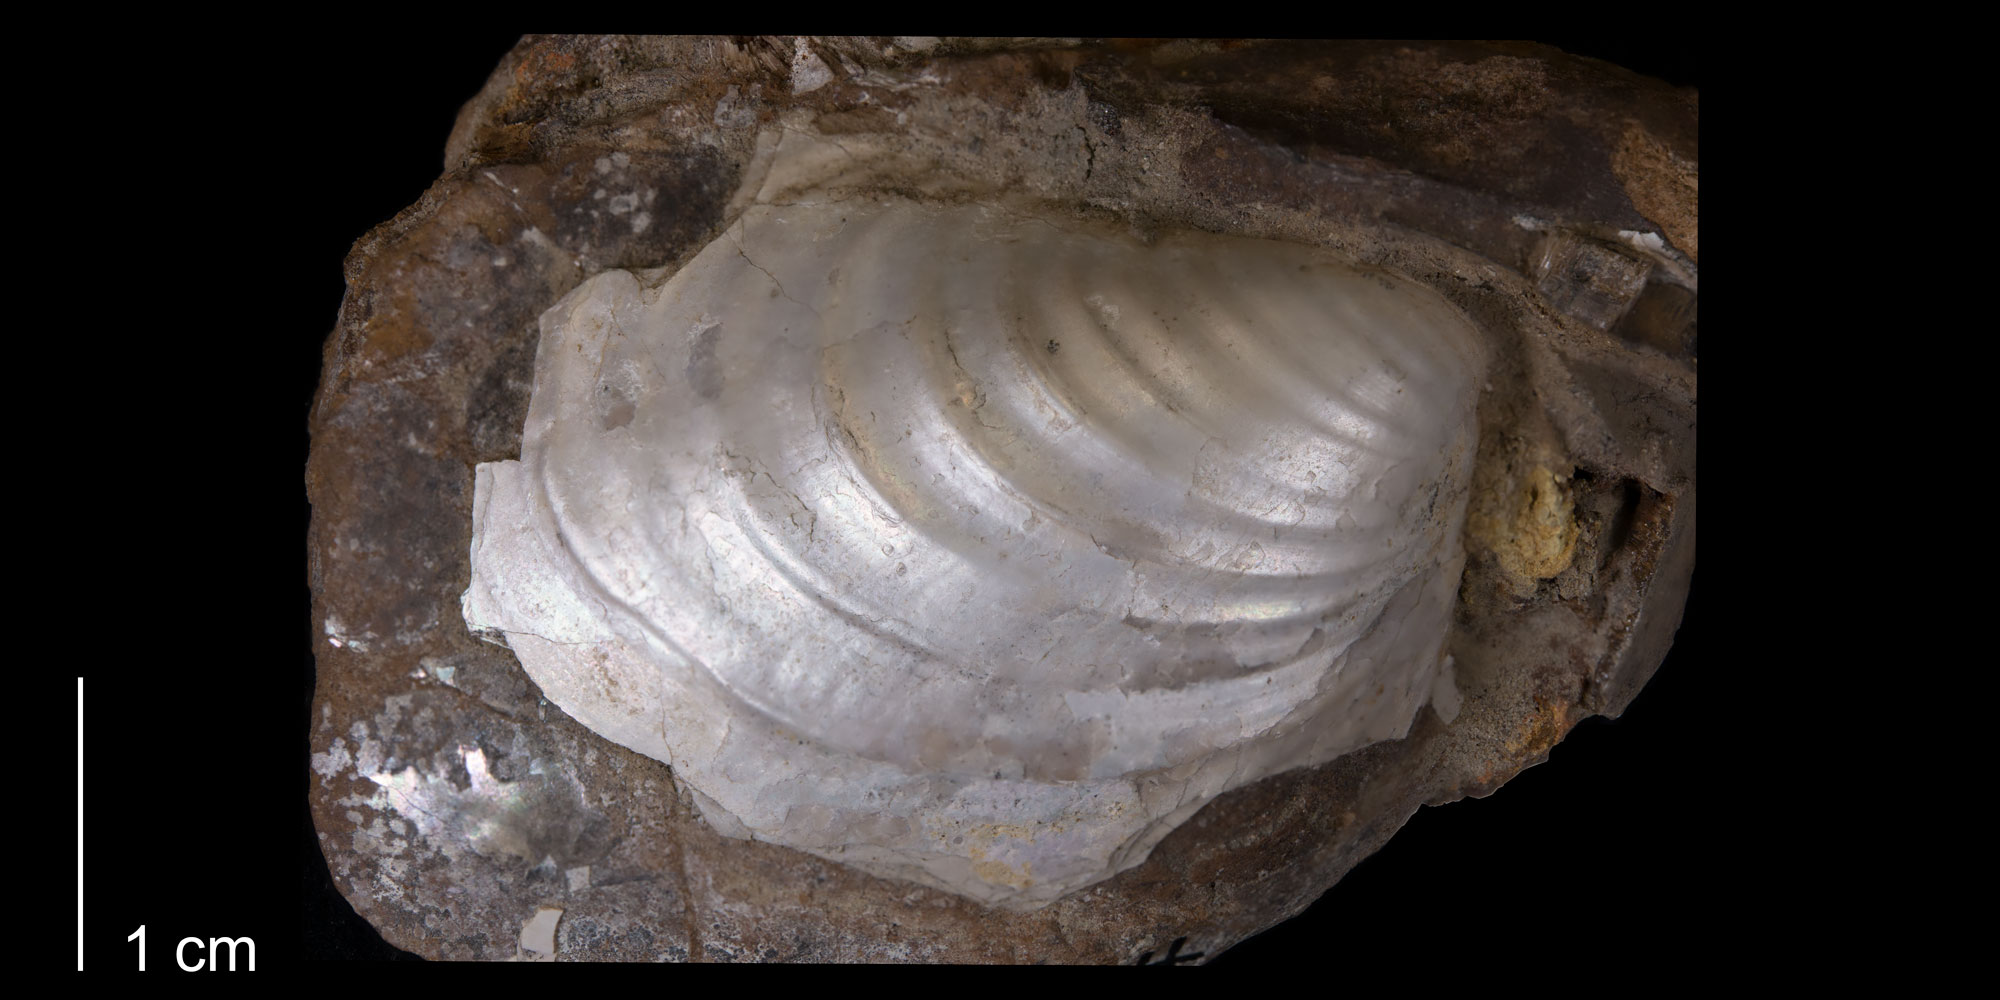 Photograph of the shell of Inoceramus sagensis, a bivalve from the Late Cretaceous Pierre Shale of South Dakota. The photo shows a white shell with concentric ridges preserved on a brown rock. The scale bar is 1 centimeter (size of shell is estimated at several centimeters).